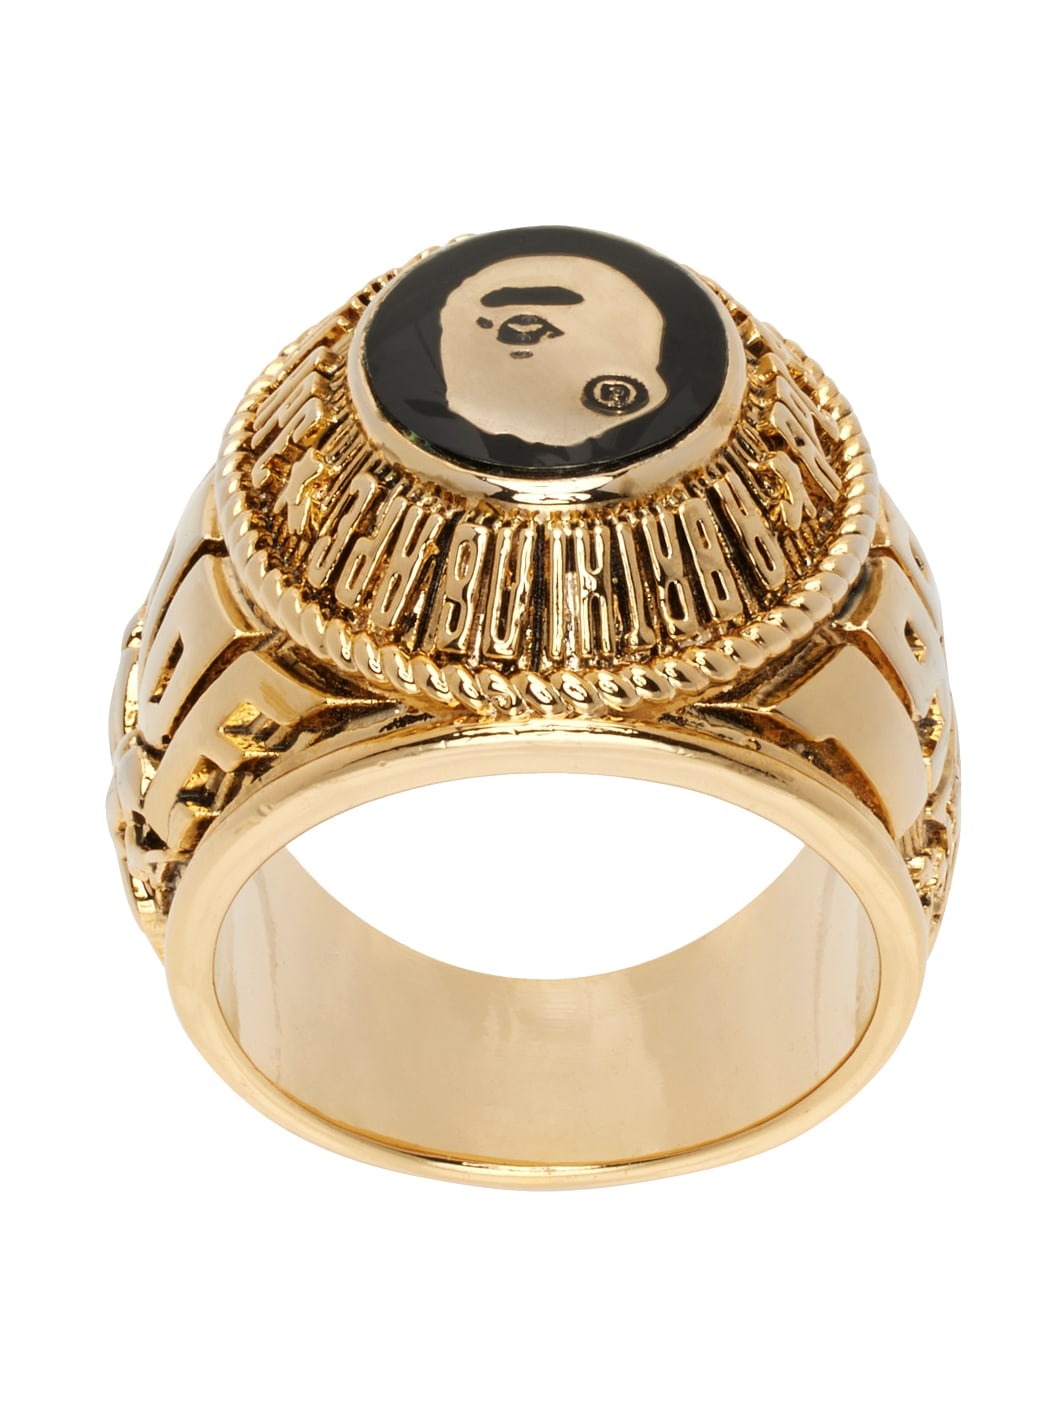 Gold 'Bape' College Ring - 1